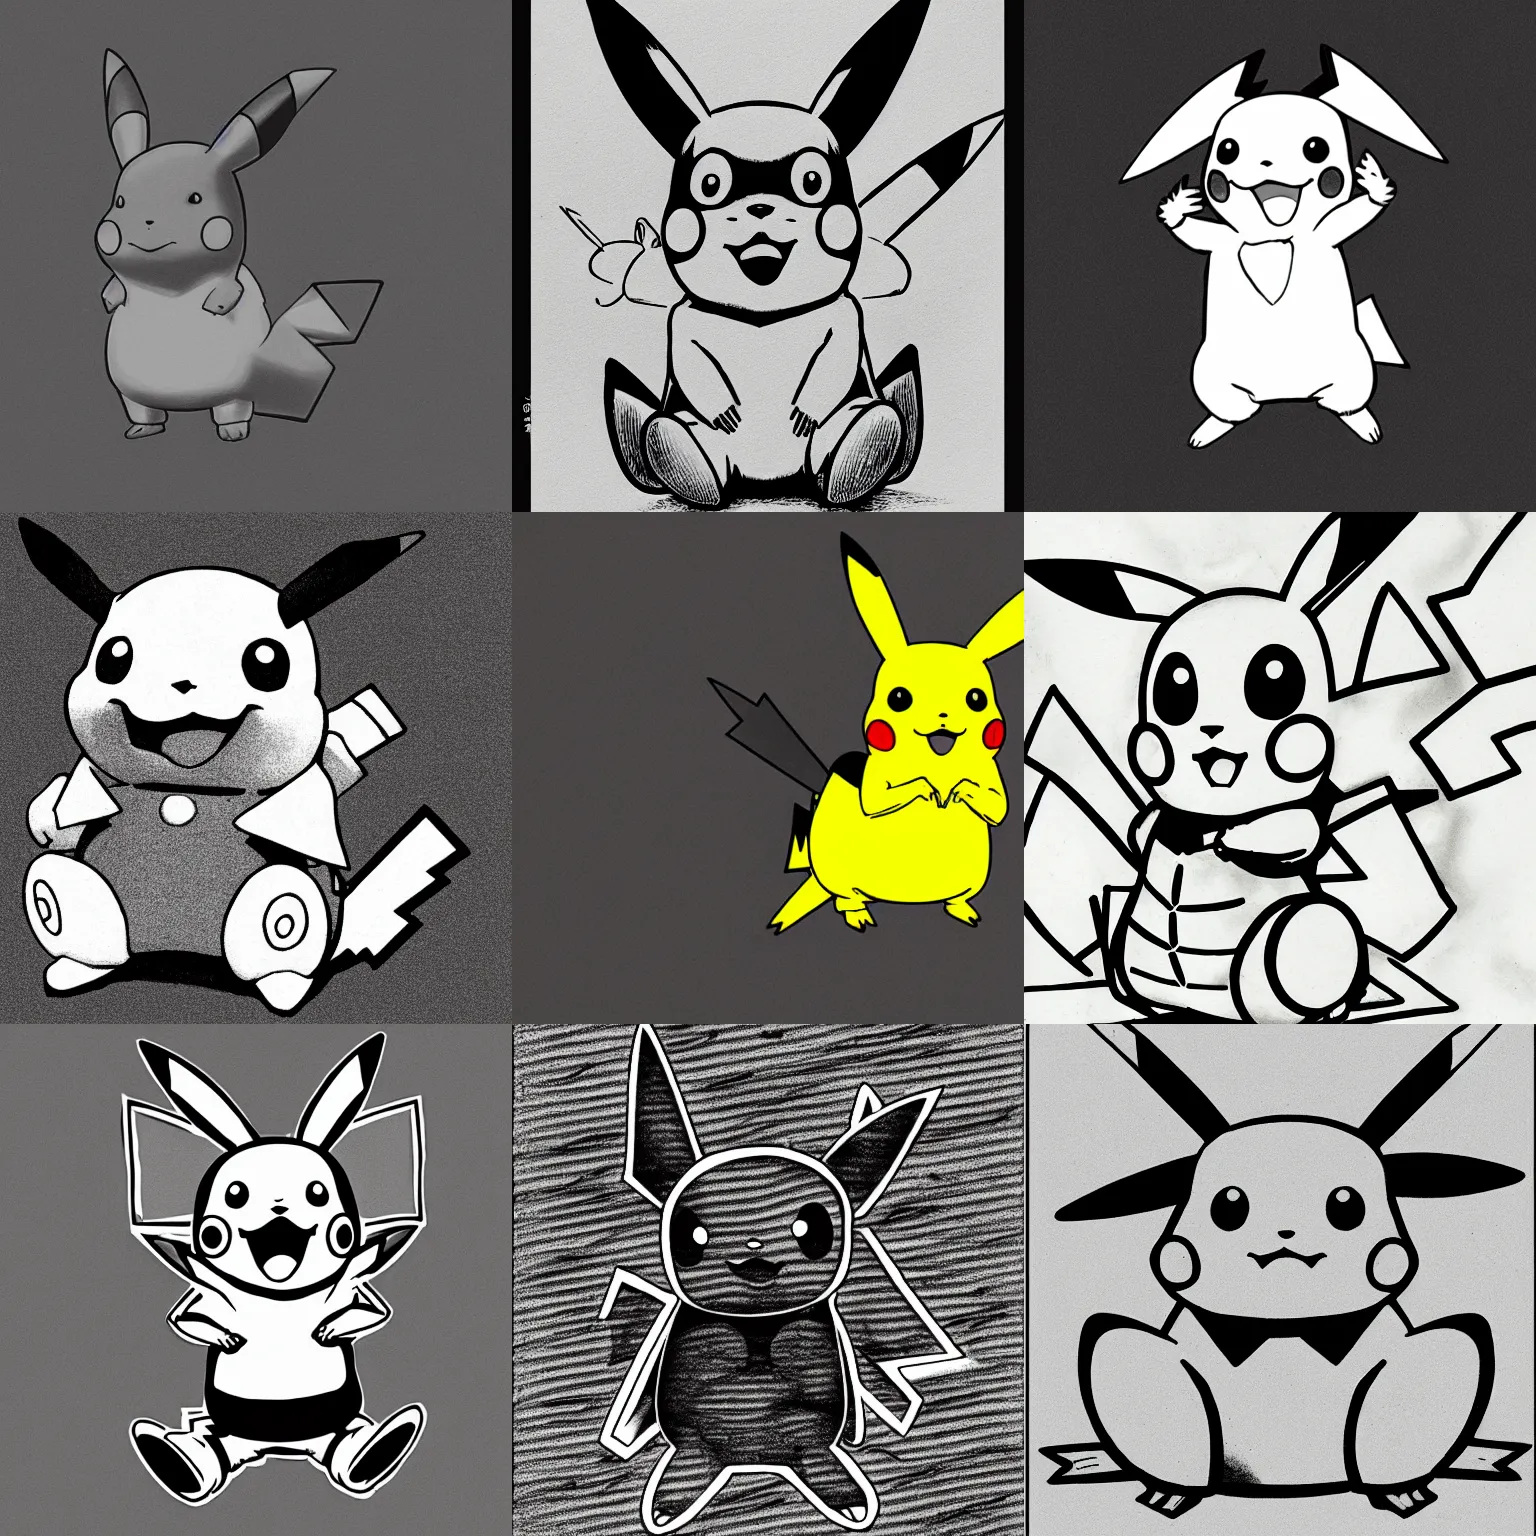 Prompt: a line art drawing of a black and yellow pikachu, reverse pikachu